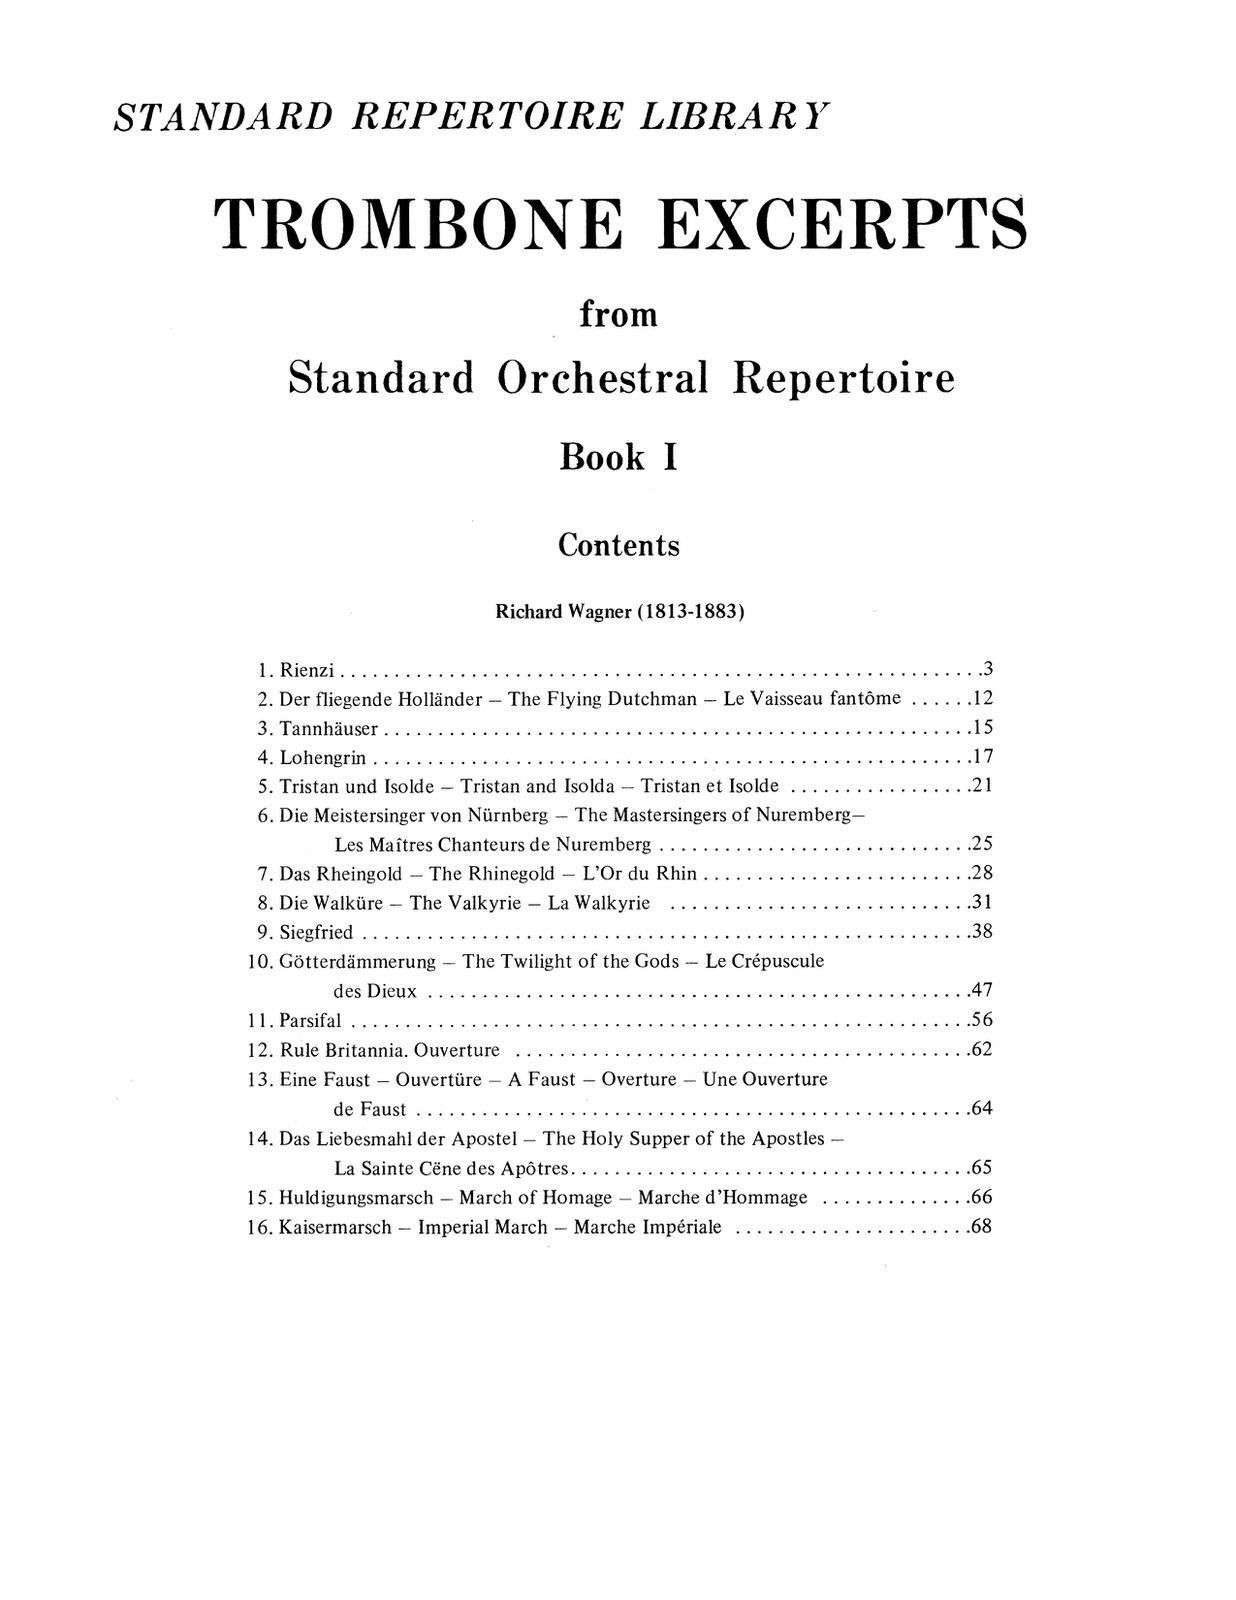 Technique through Repertoire, Book 1: Excerpts from Standard Piano